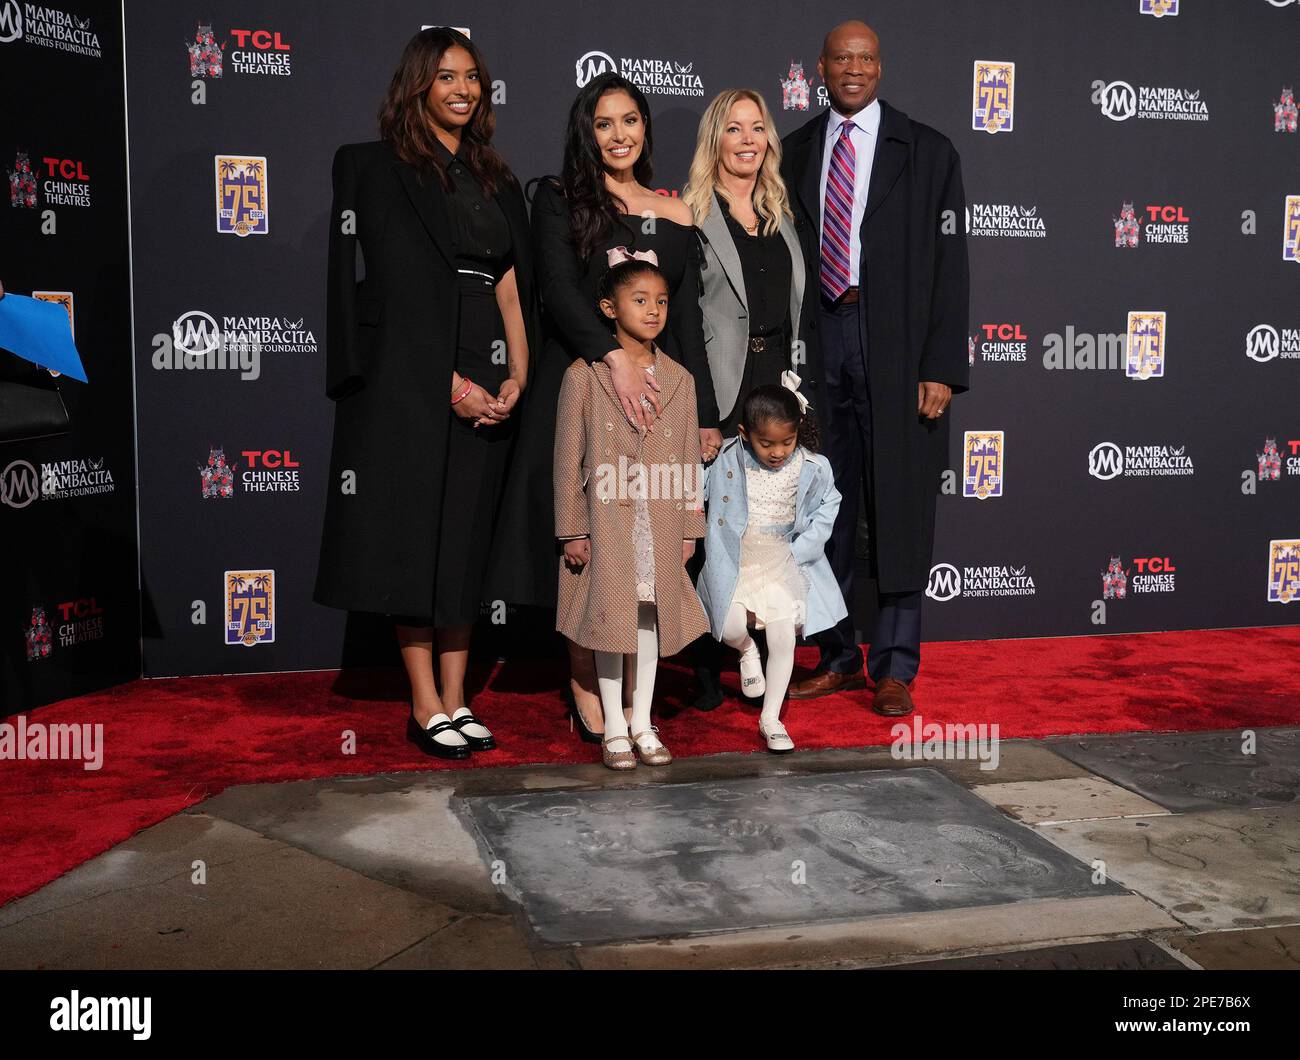 Kobe Bryant's Daughters Put Hands in Late Dad's Handprint: Photo